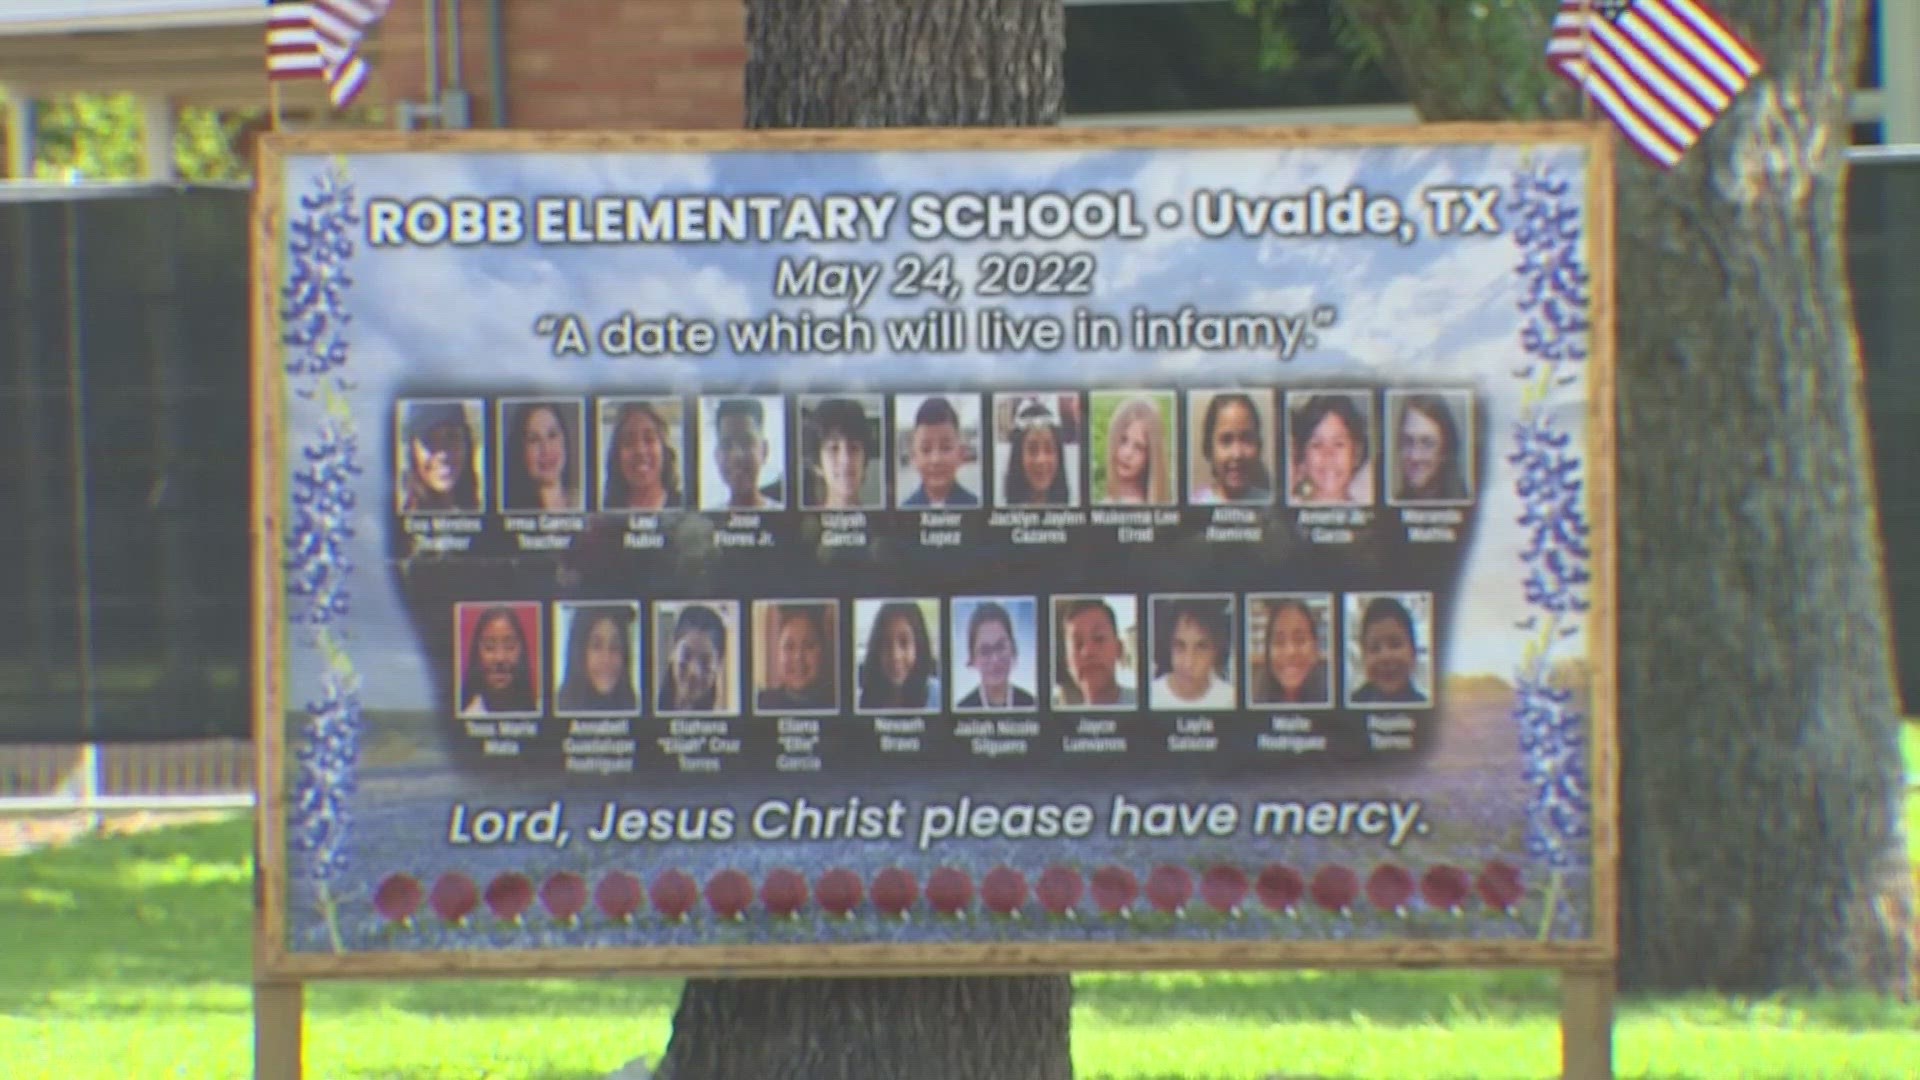 On May 24, 2022, two teachers and 19 children were shot and killed at Robb Elementary School in Uvalde.